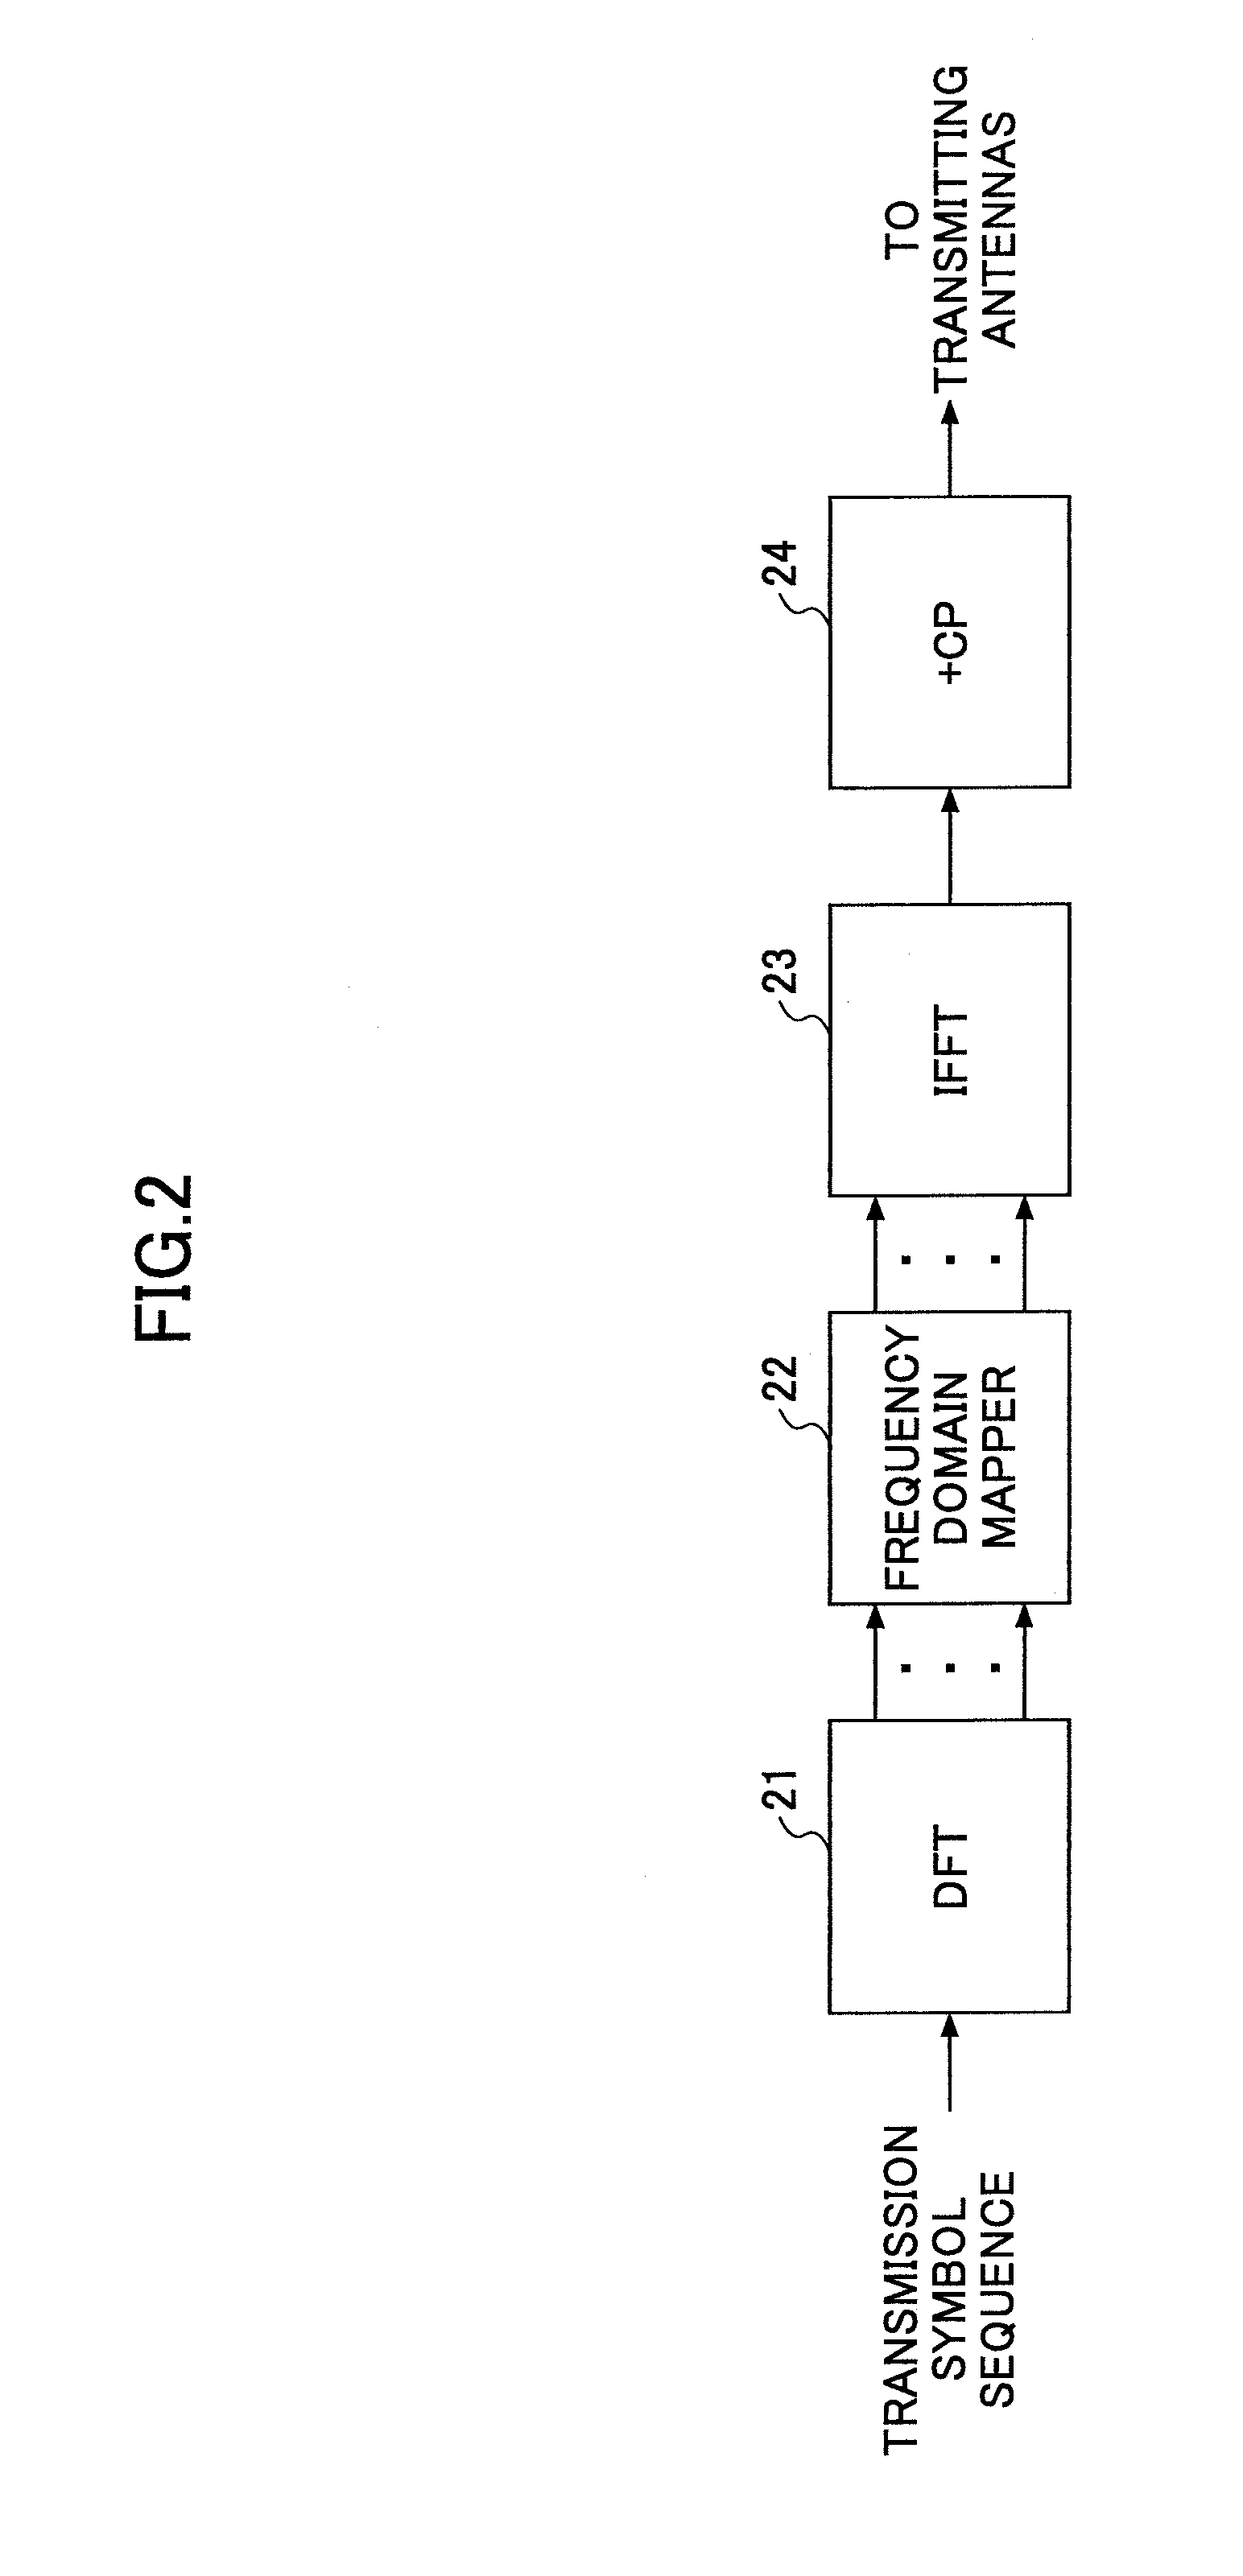 Mobile communication system, receiving device, and method